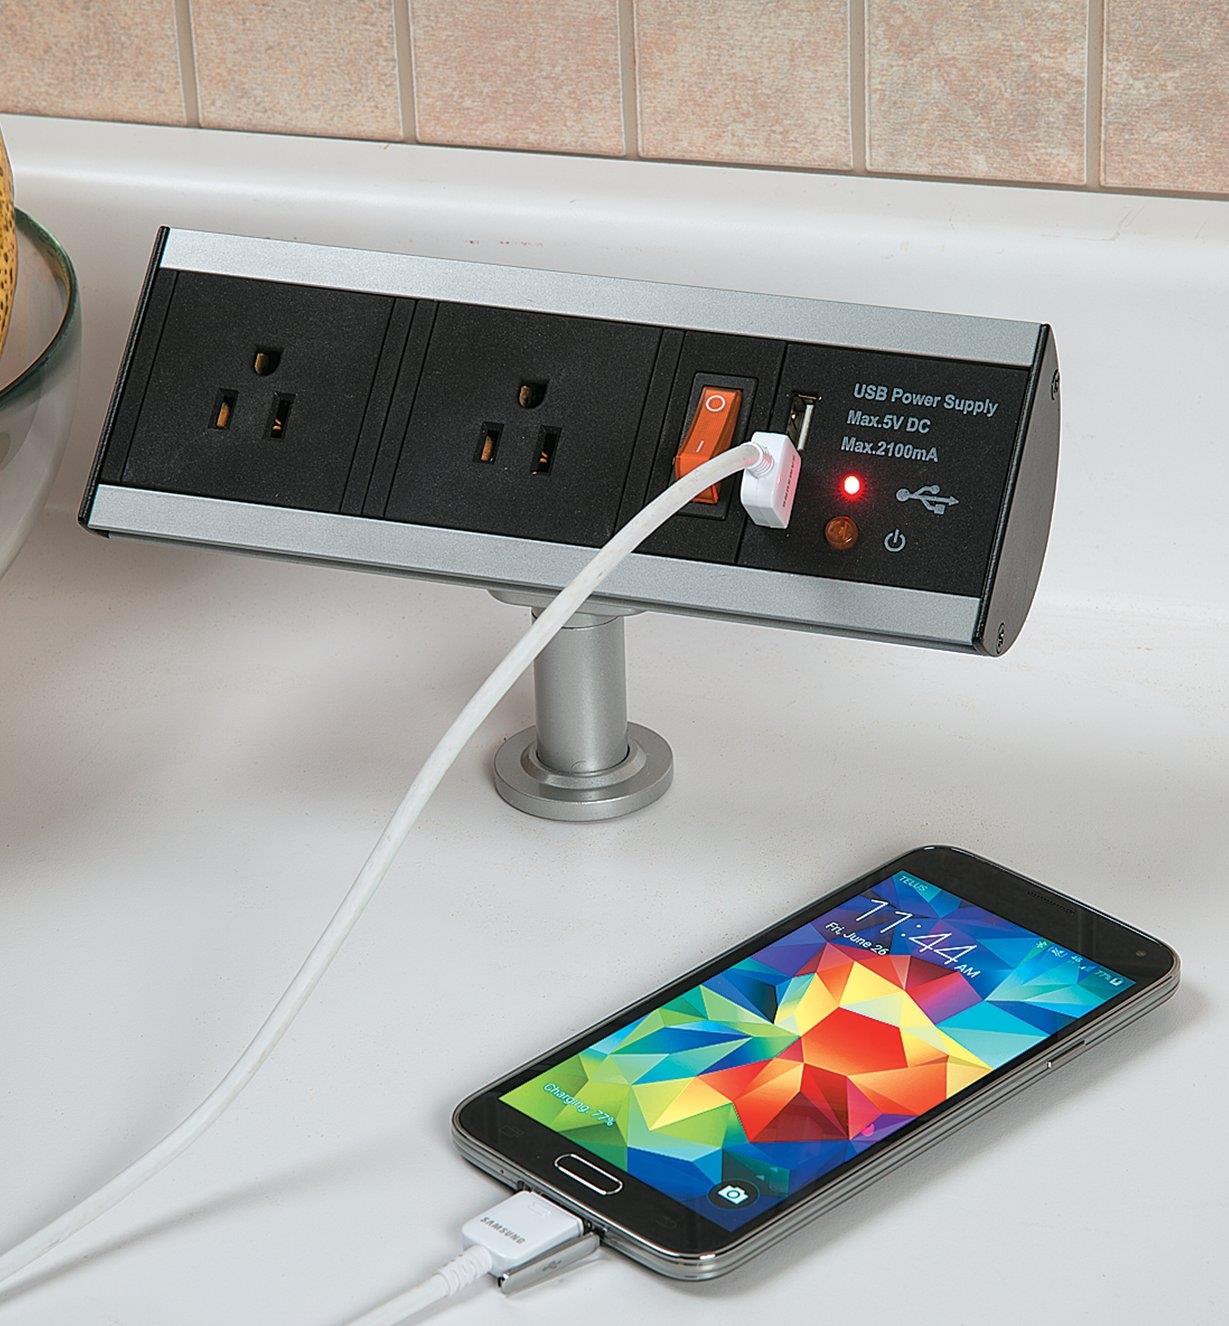 Cell phone plugged into a Stand-Off Power Bar installed in a kitchen counter